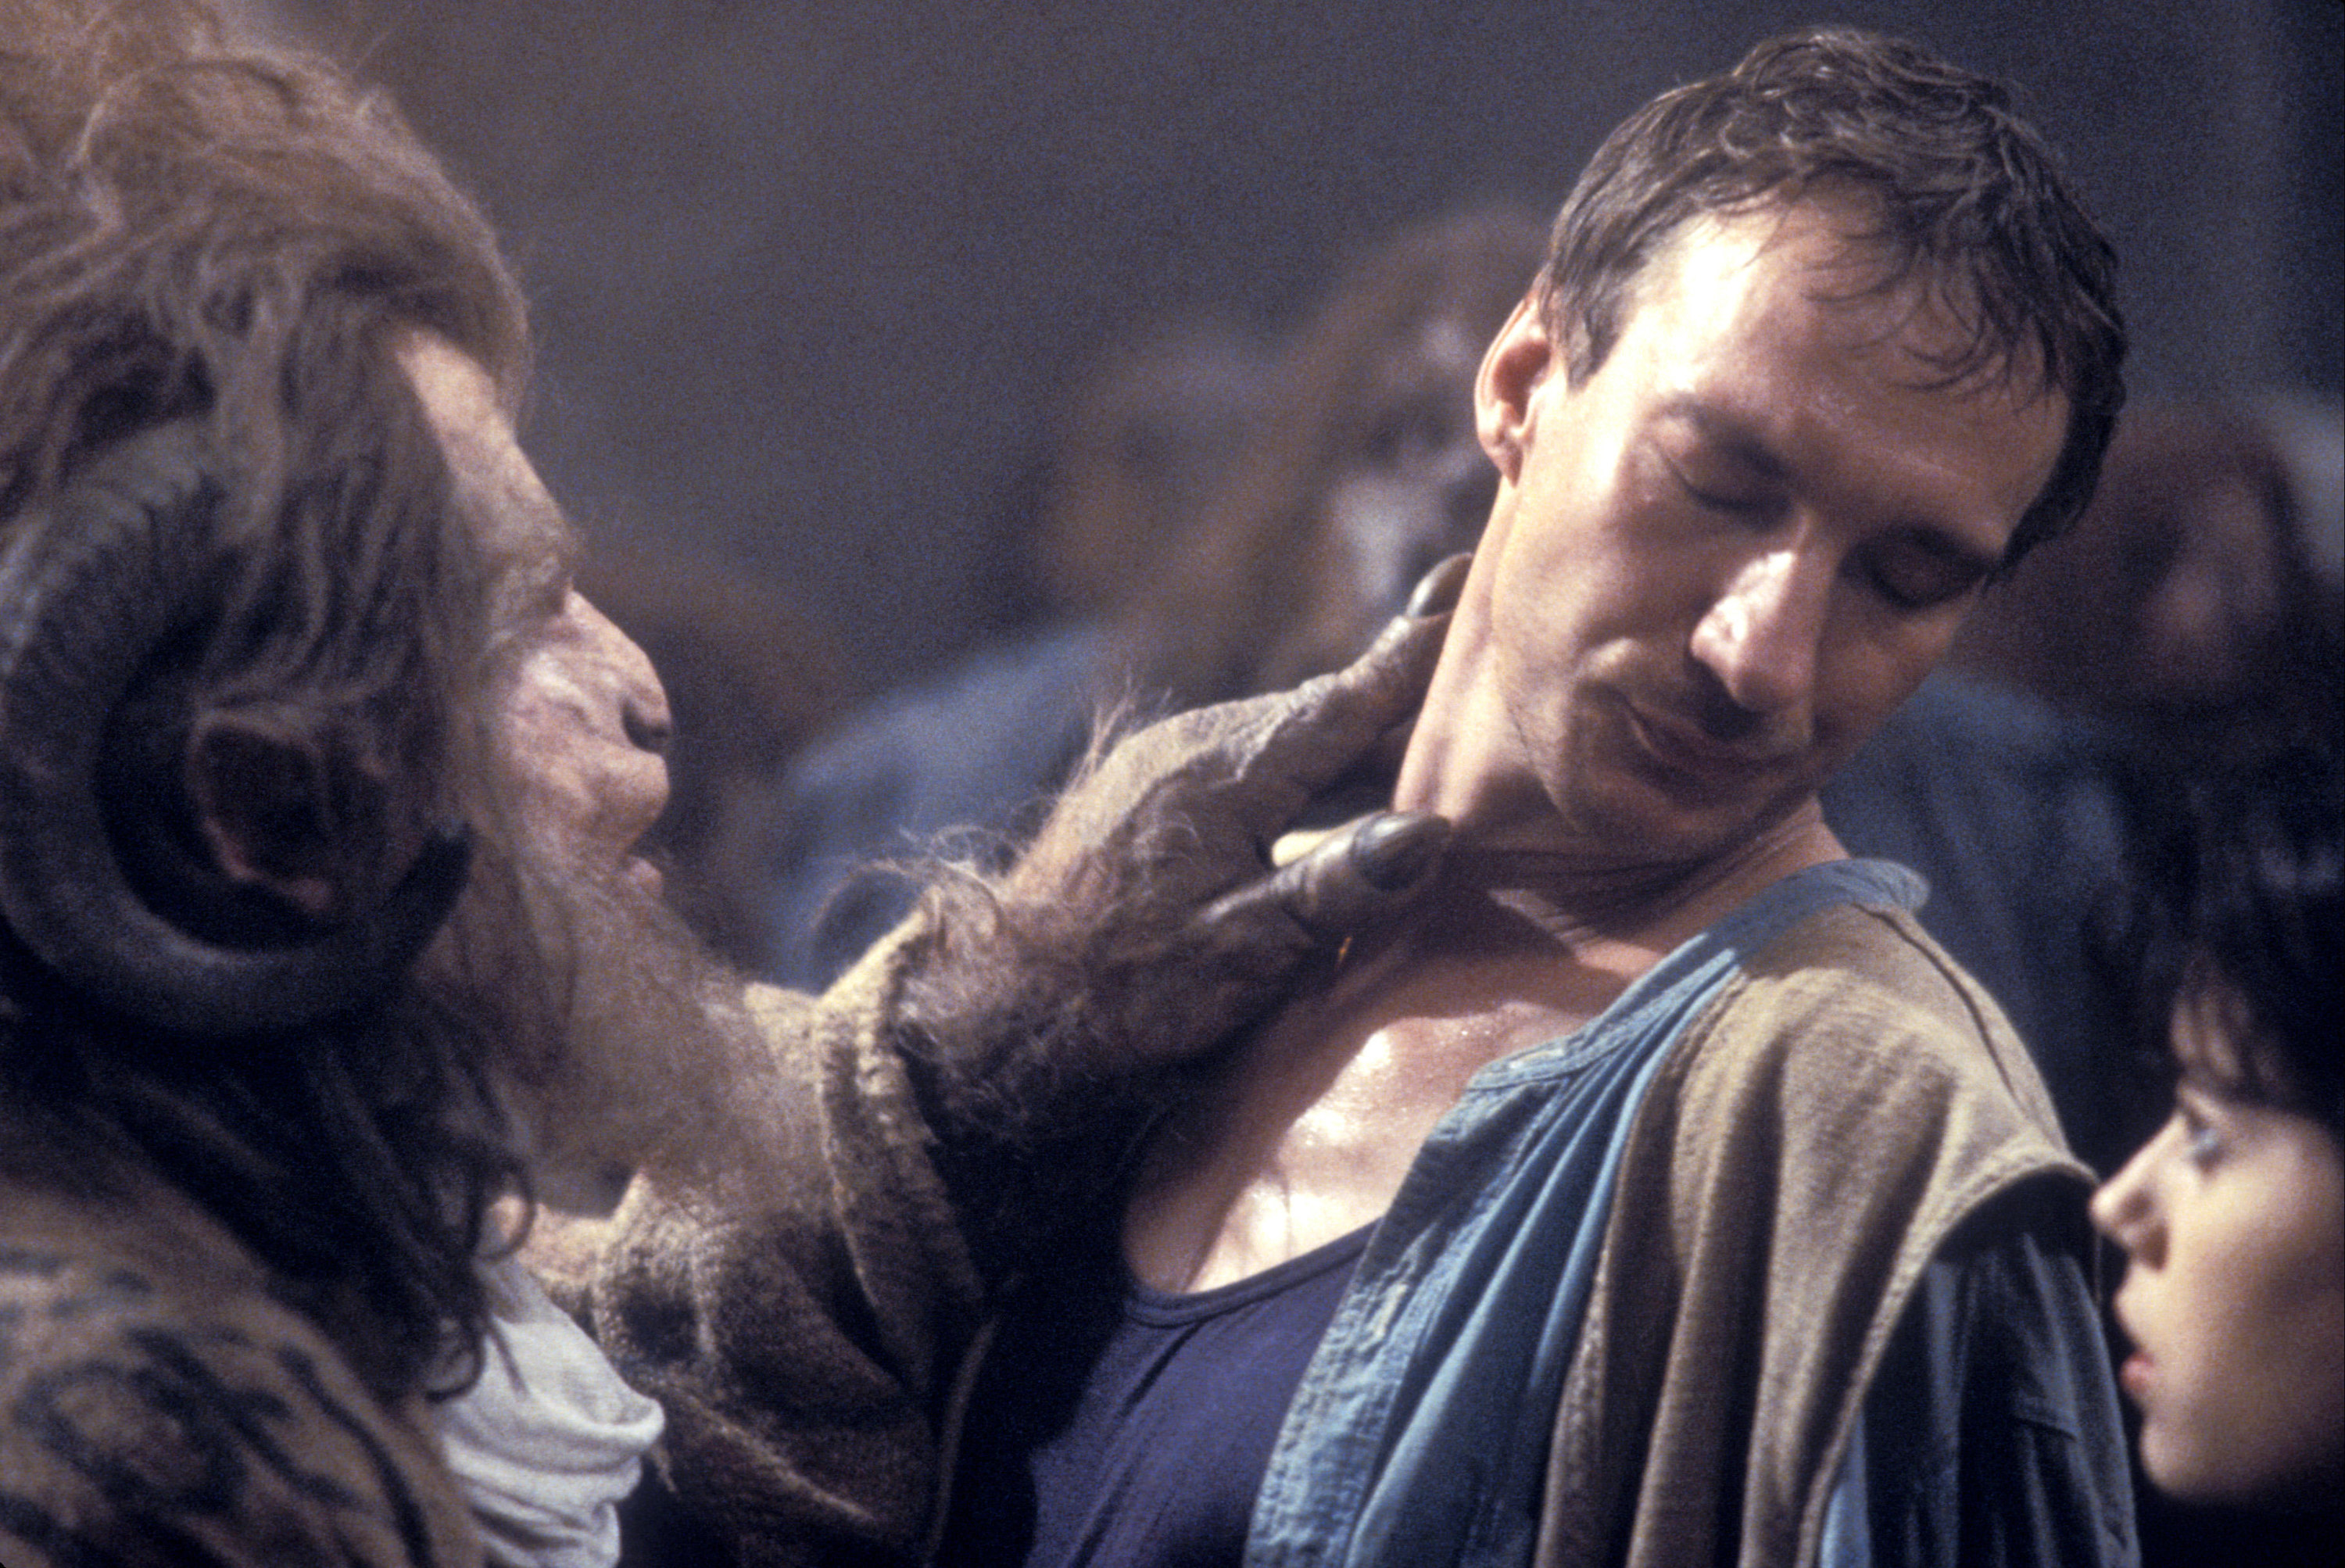 David Thewlis is touched on the neck by a goat-human hybrid